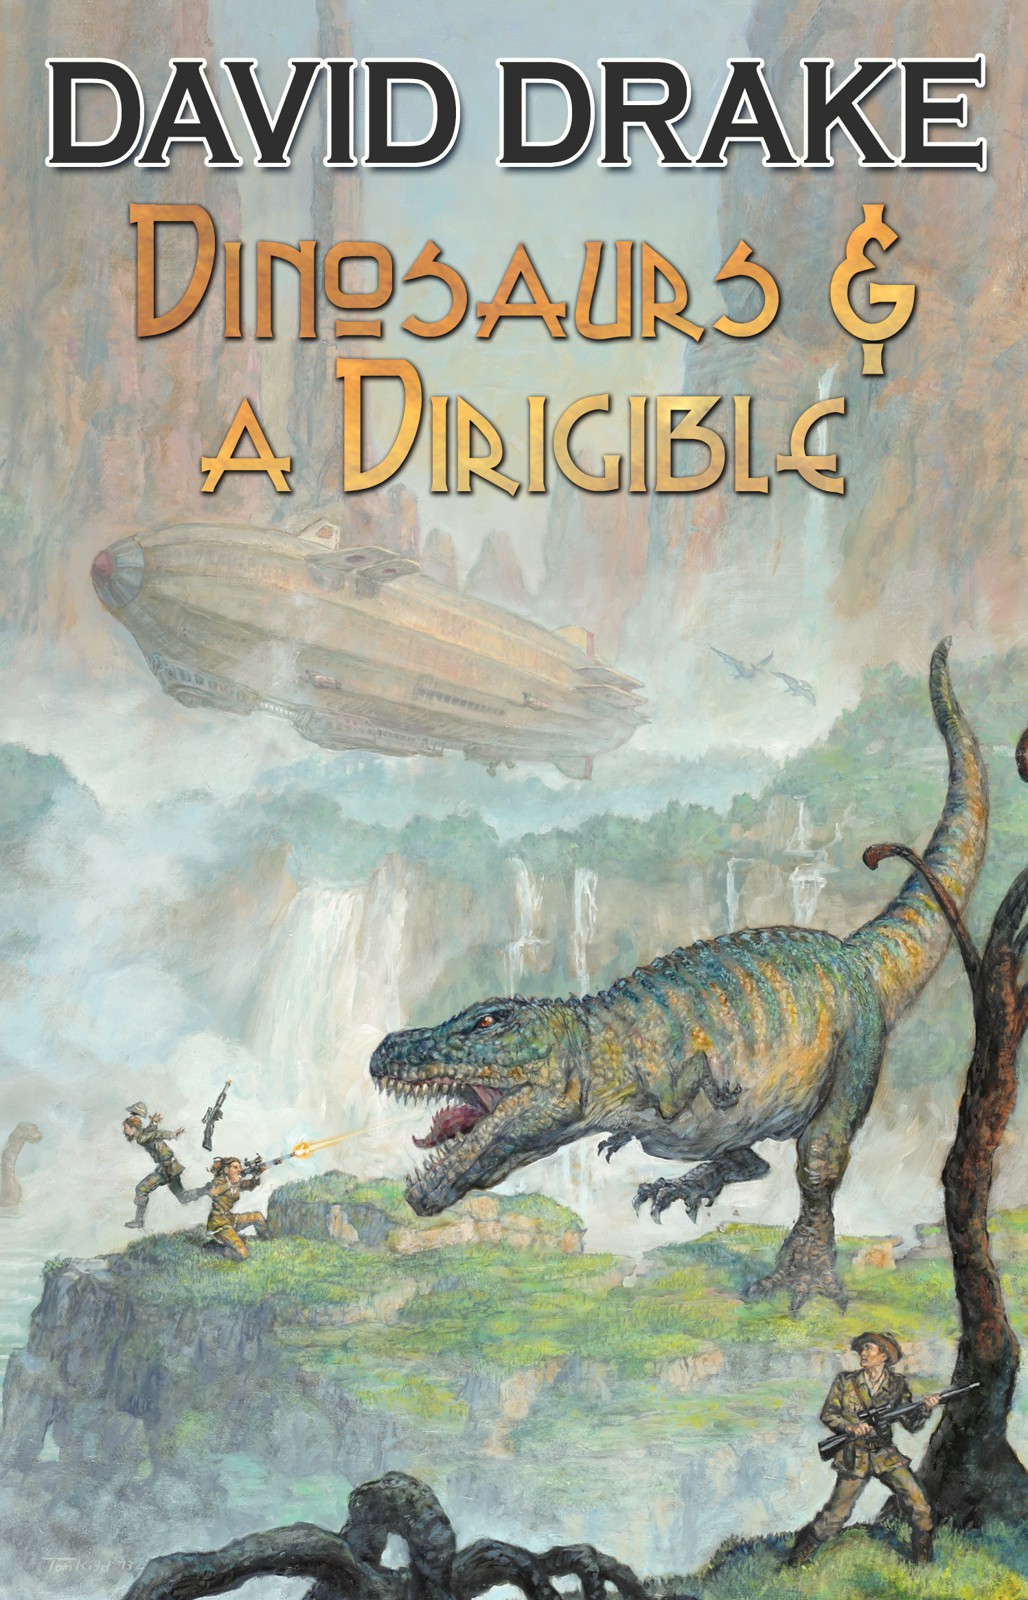 Dinosaurs & A Dirigible by David Drake